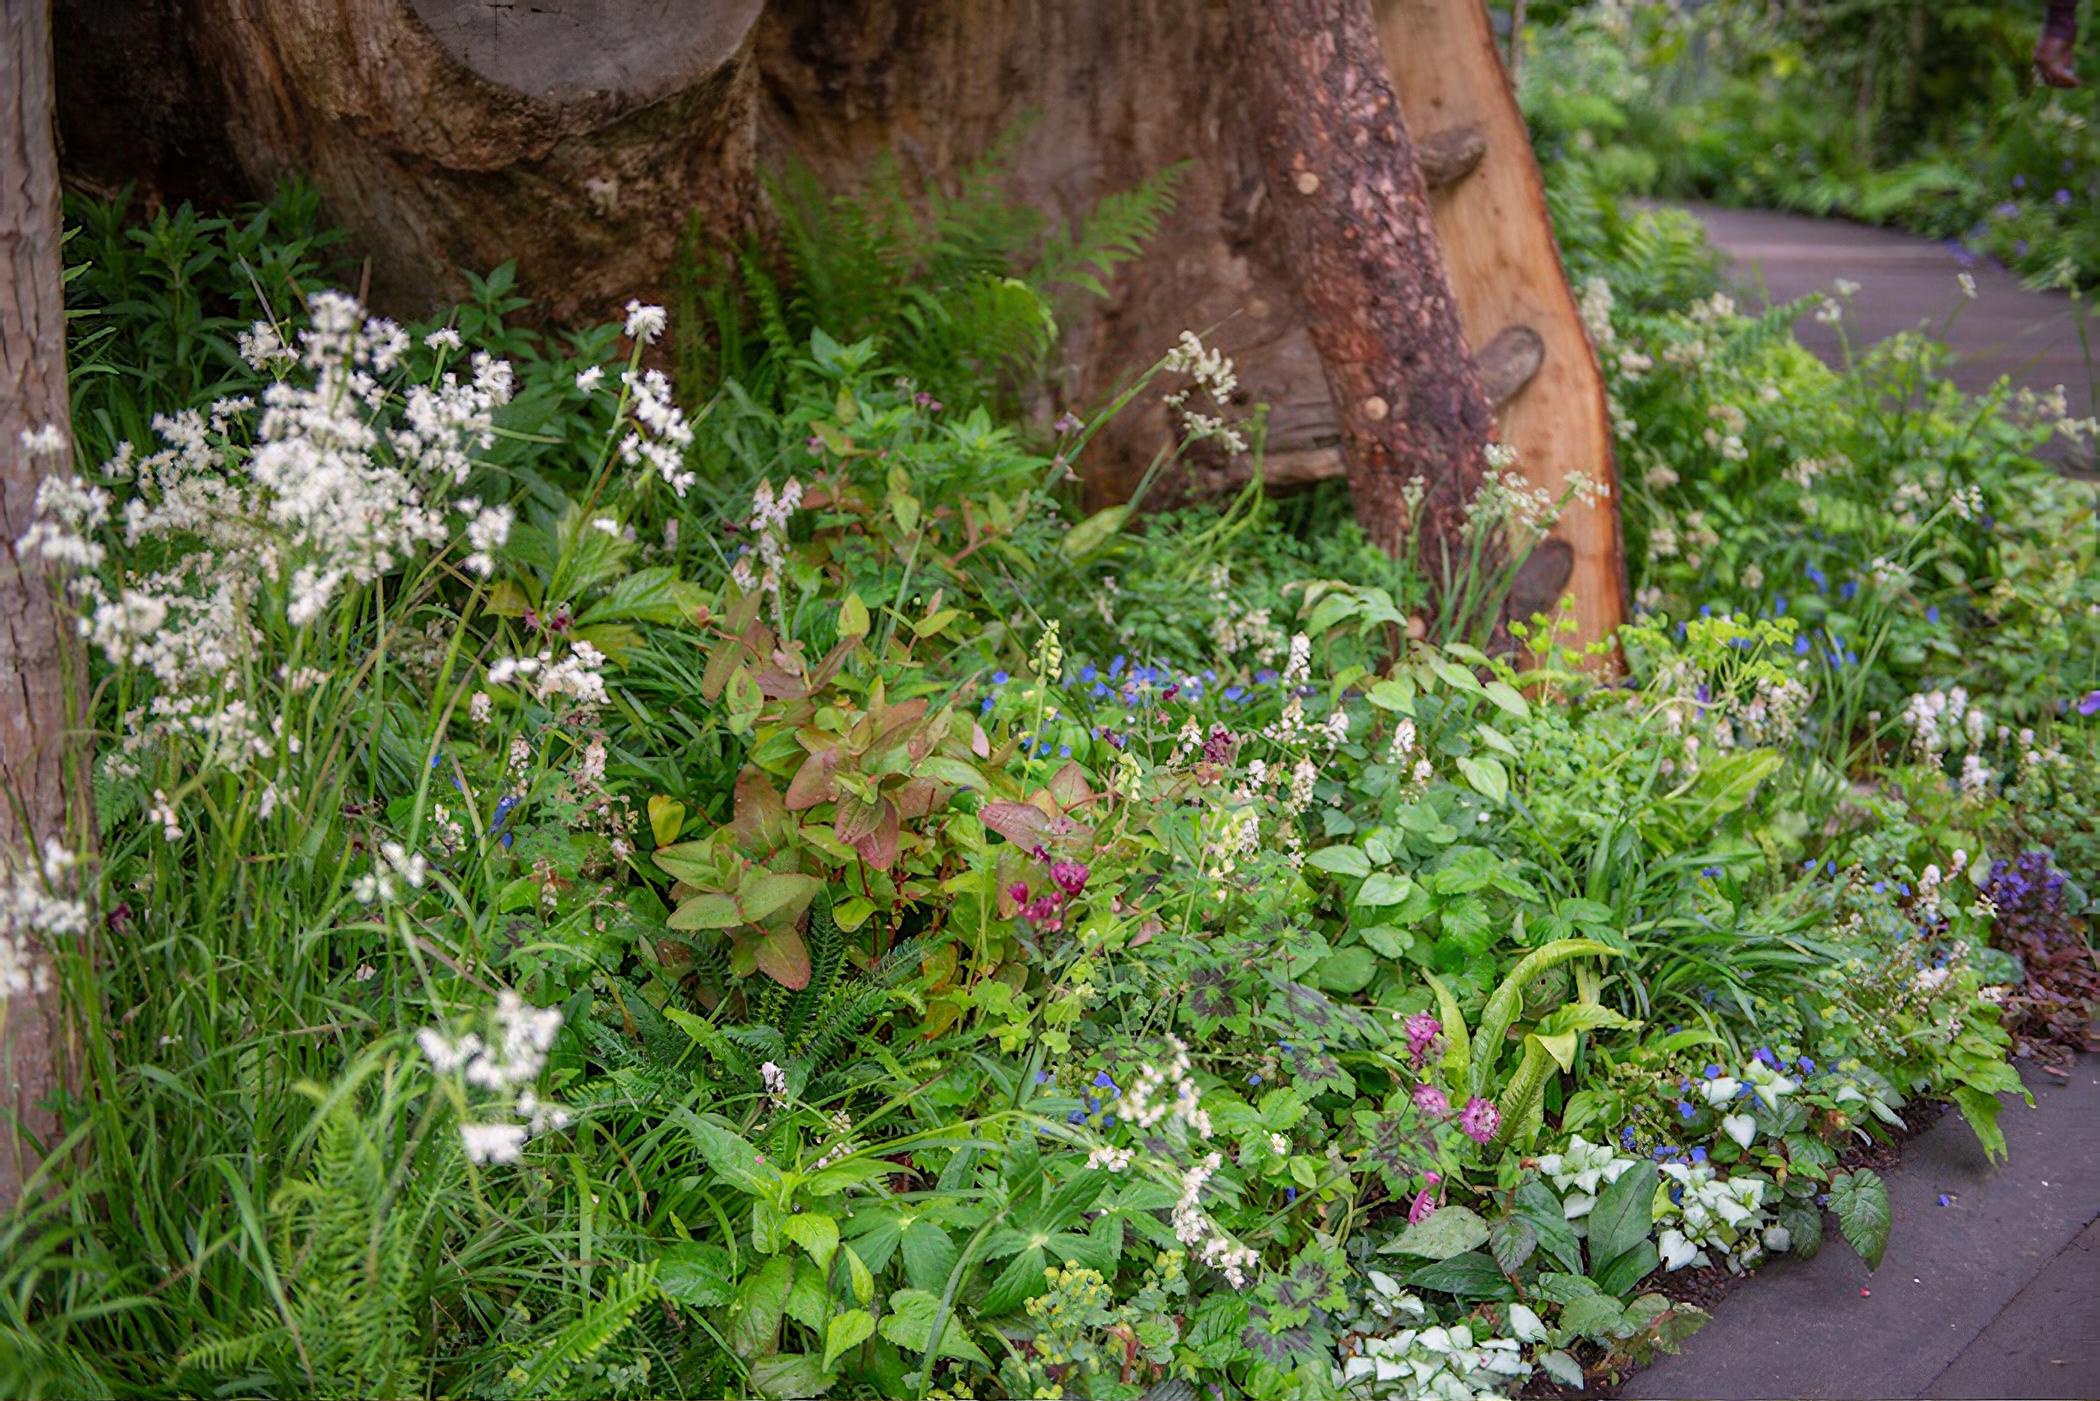 The RHS Back to Nature Garden, designed by The Duchess of Cambridge and award-winning landscape architects Andree Davies and Adam White of Davies White Landscape Architects, Chelsea Flower Show 2019